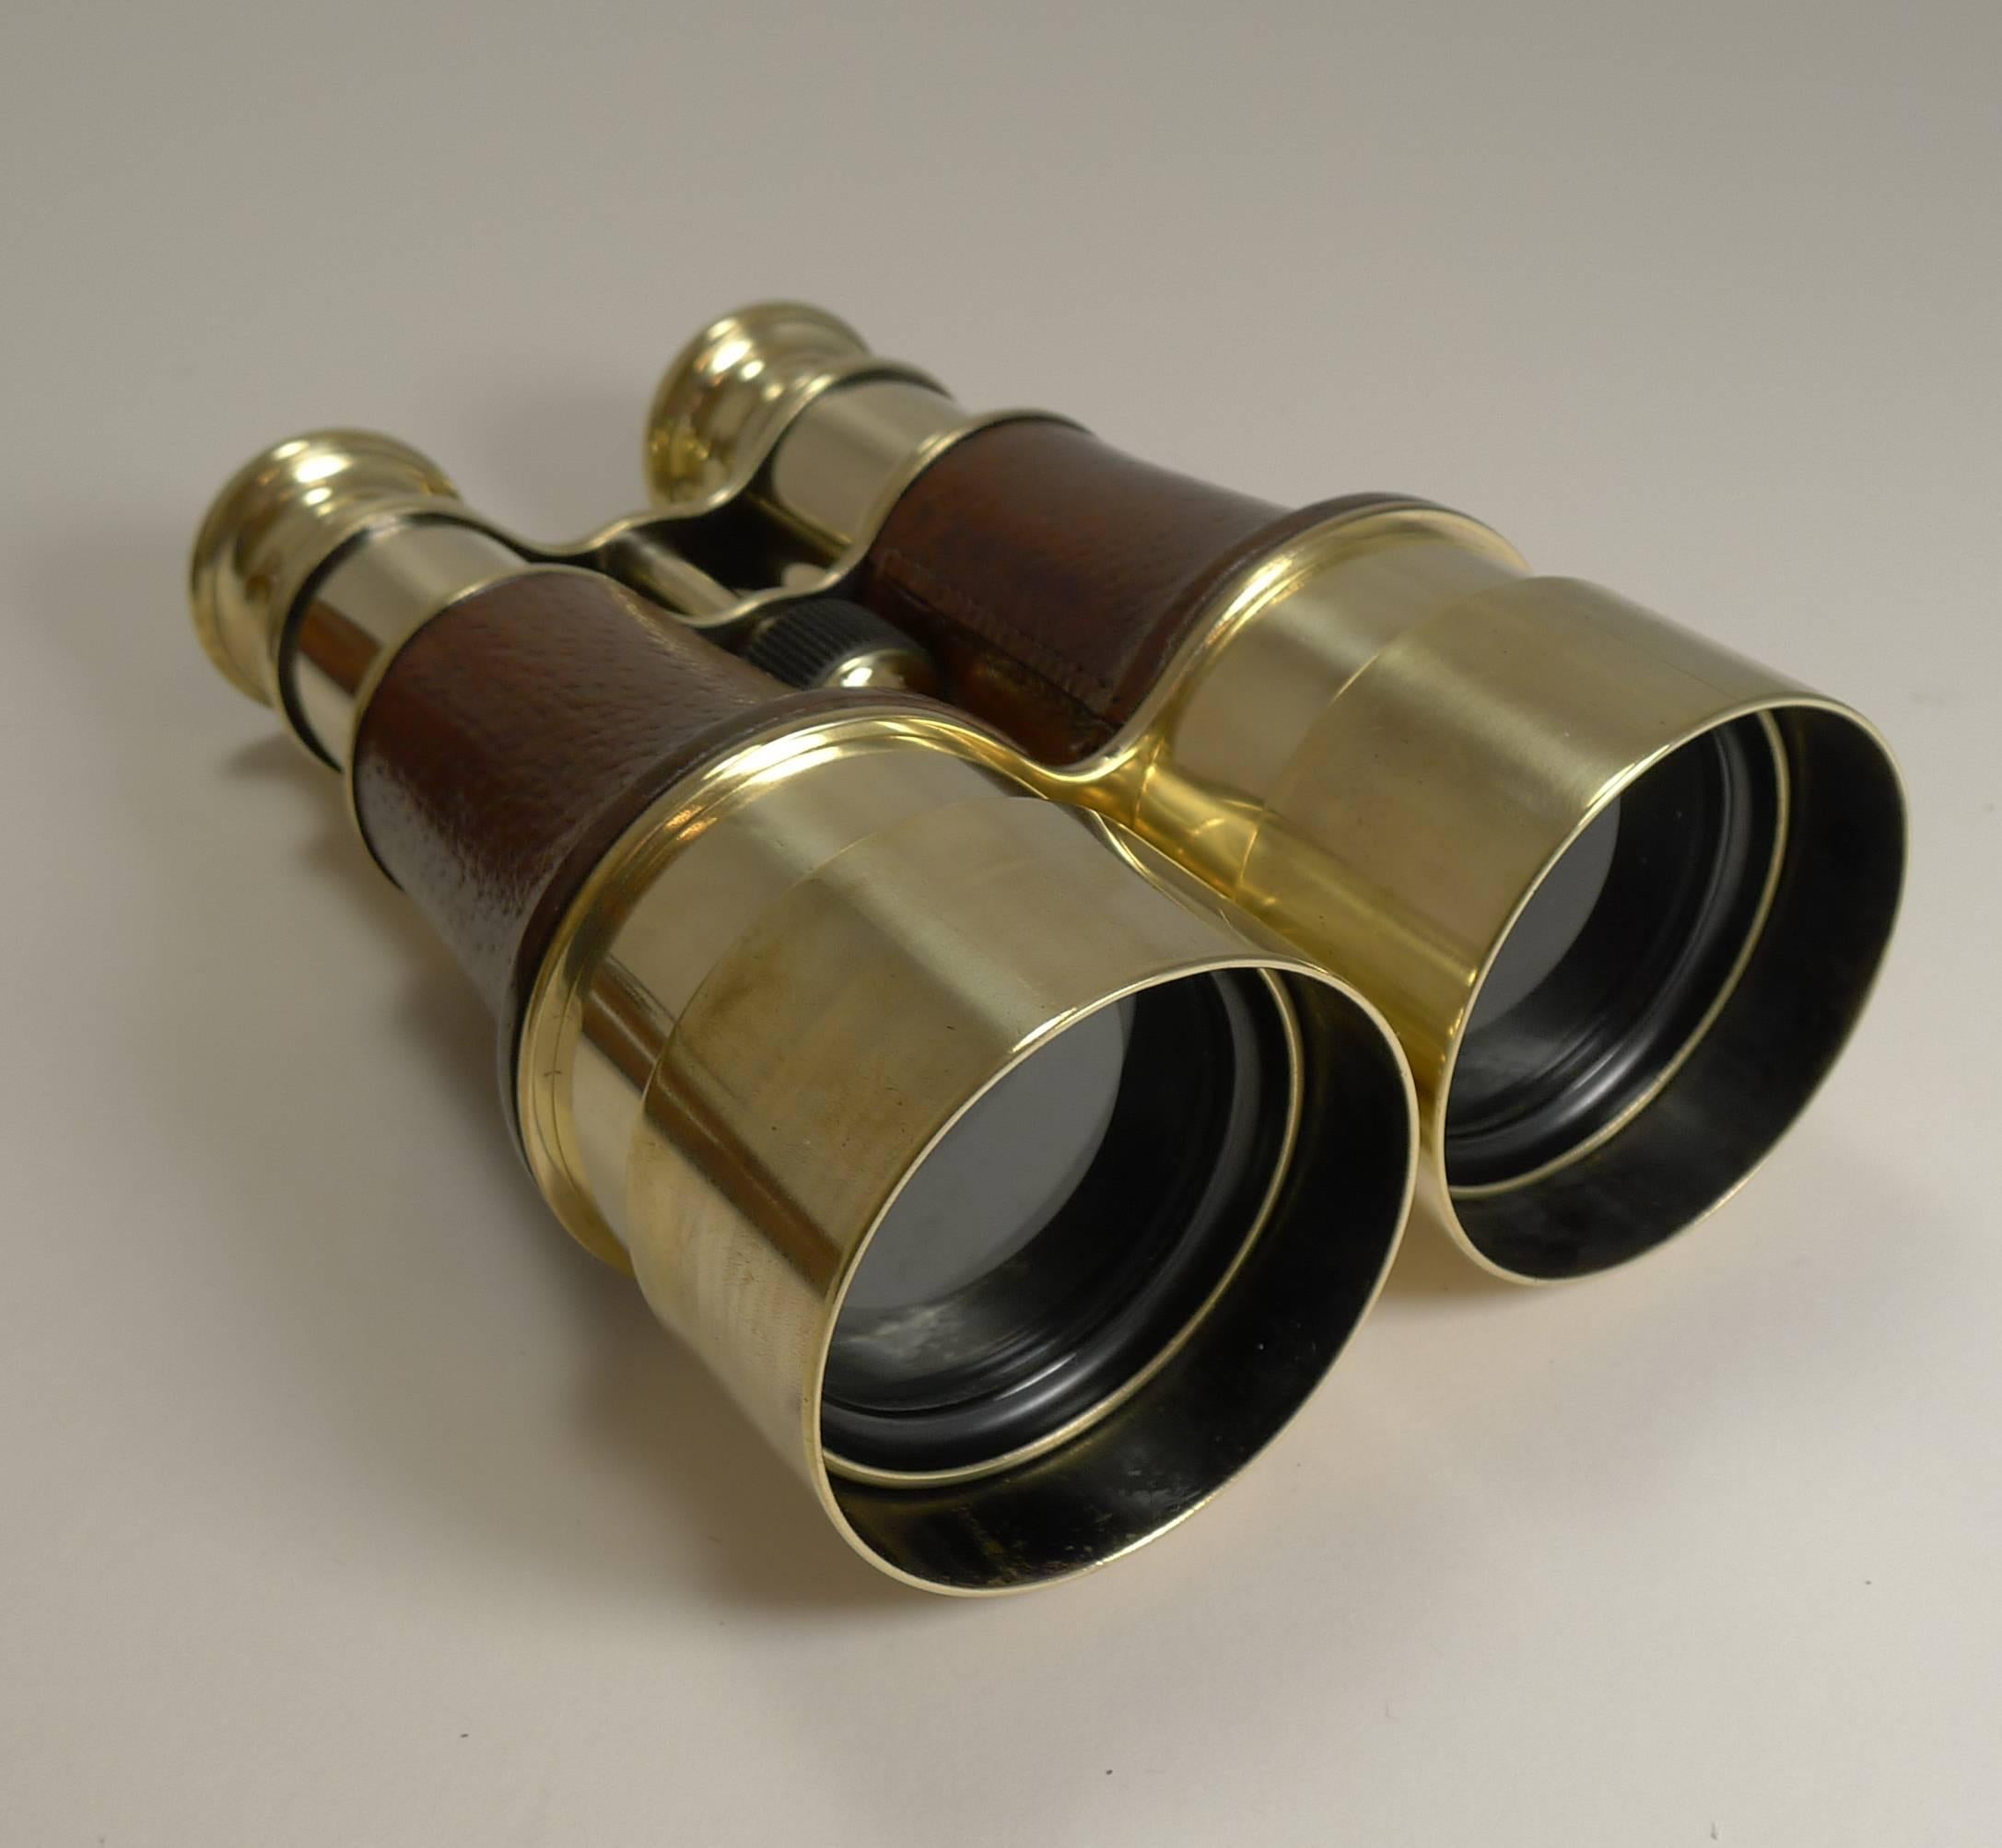 Superb Pair of WW1 Binoculars and Case, British Officer's Issue, 1916 Signed 1